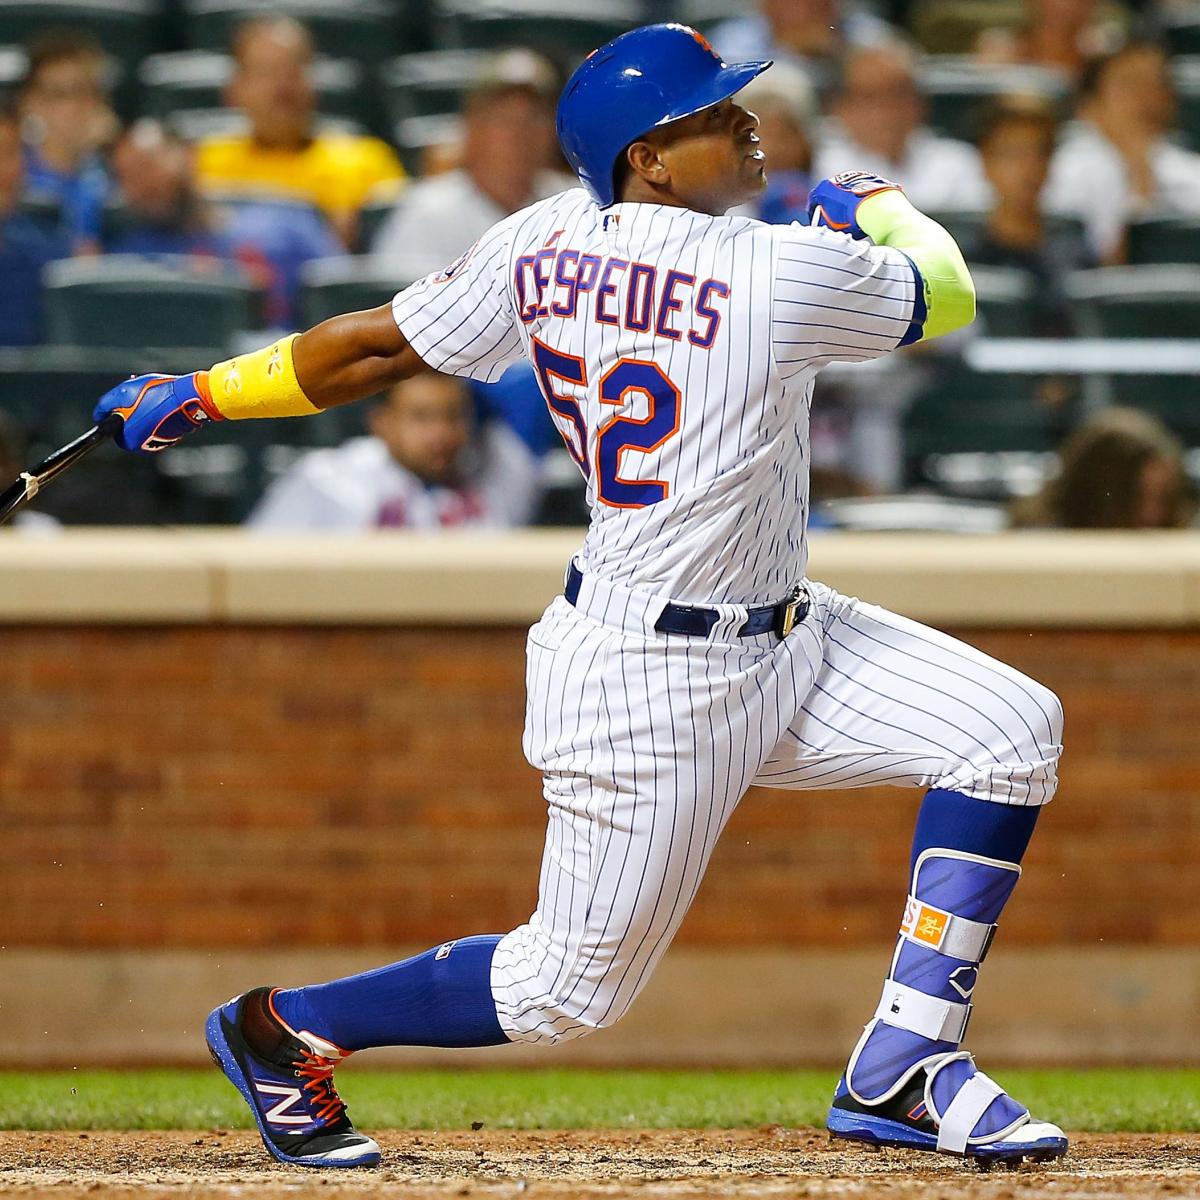 Cespedes showing he's worth a contract extension